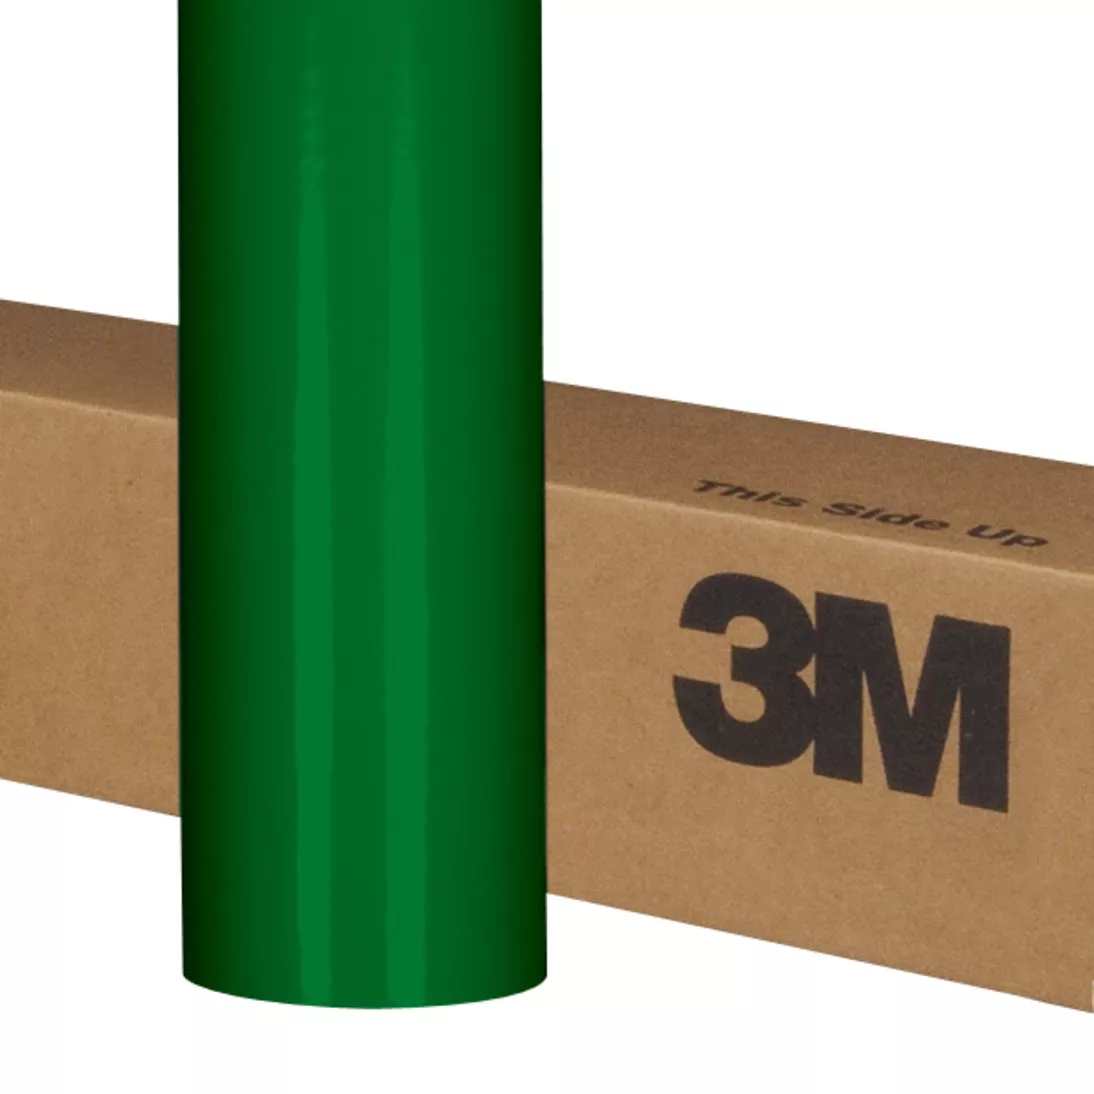 3M™ Scotchcal™ ElectroCut™ Graphic Film 7125-186, Bright Green, 48 in x
50 yd